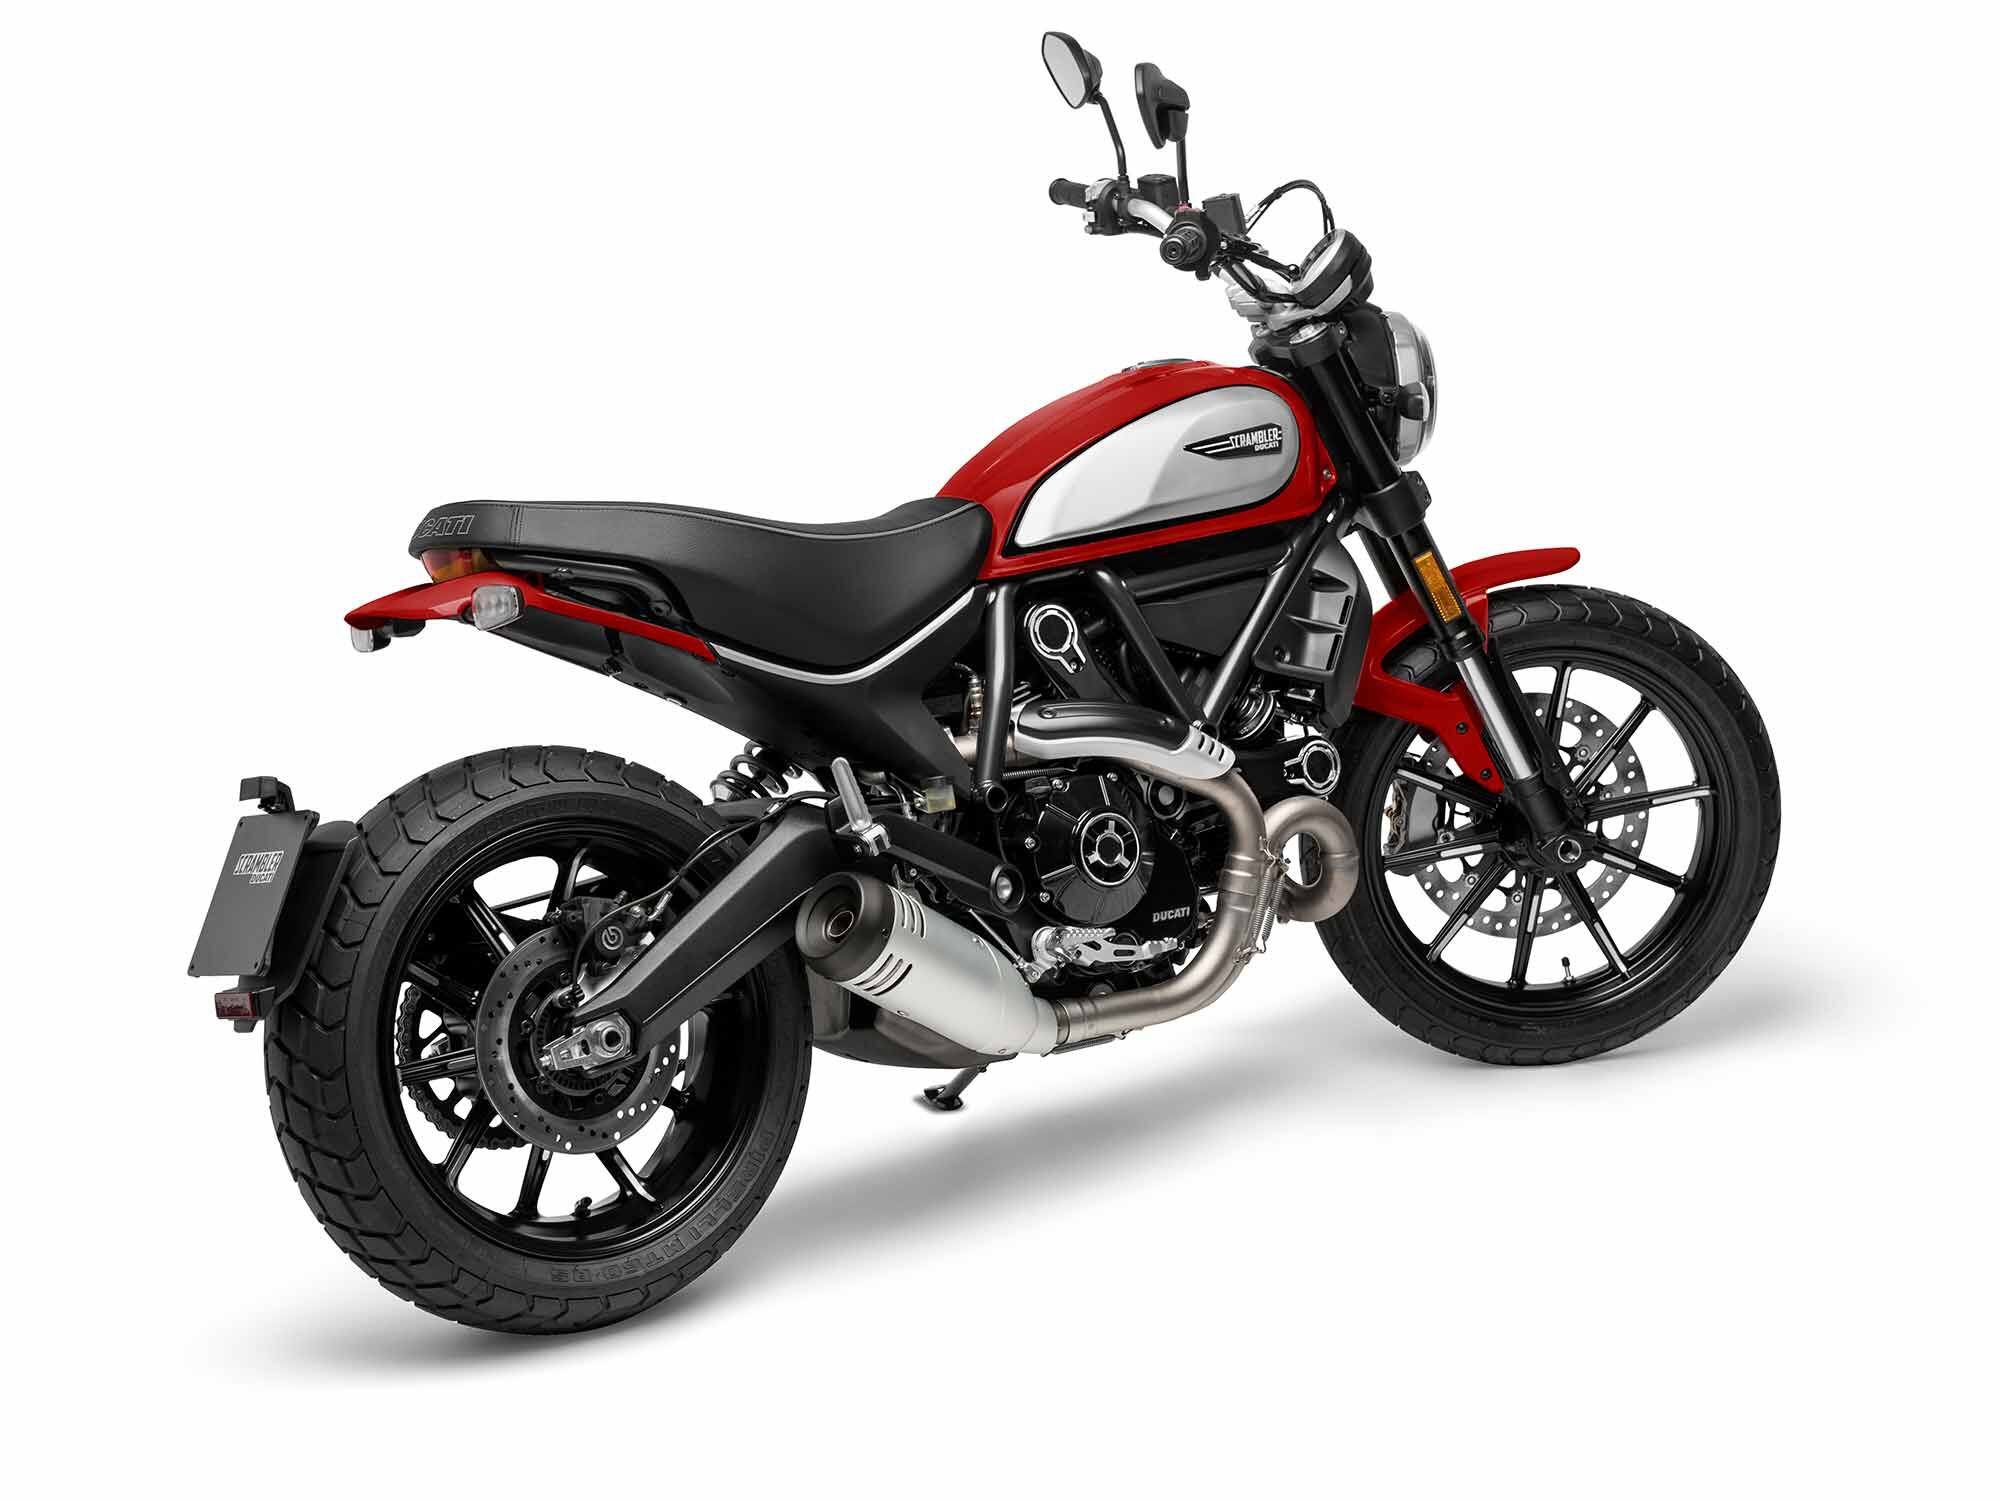 The classic Scrambler Icon. The first modern Scrambler was introduced in 2015.